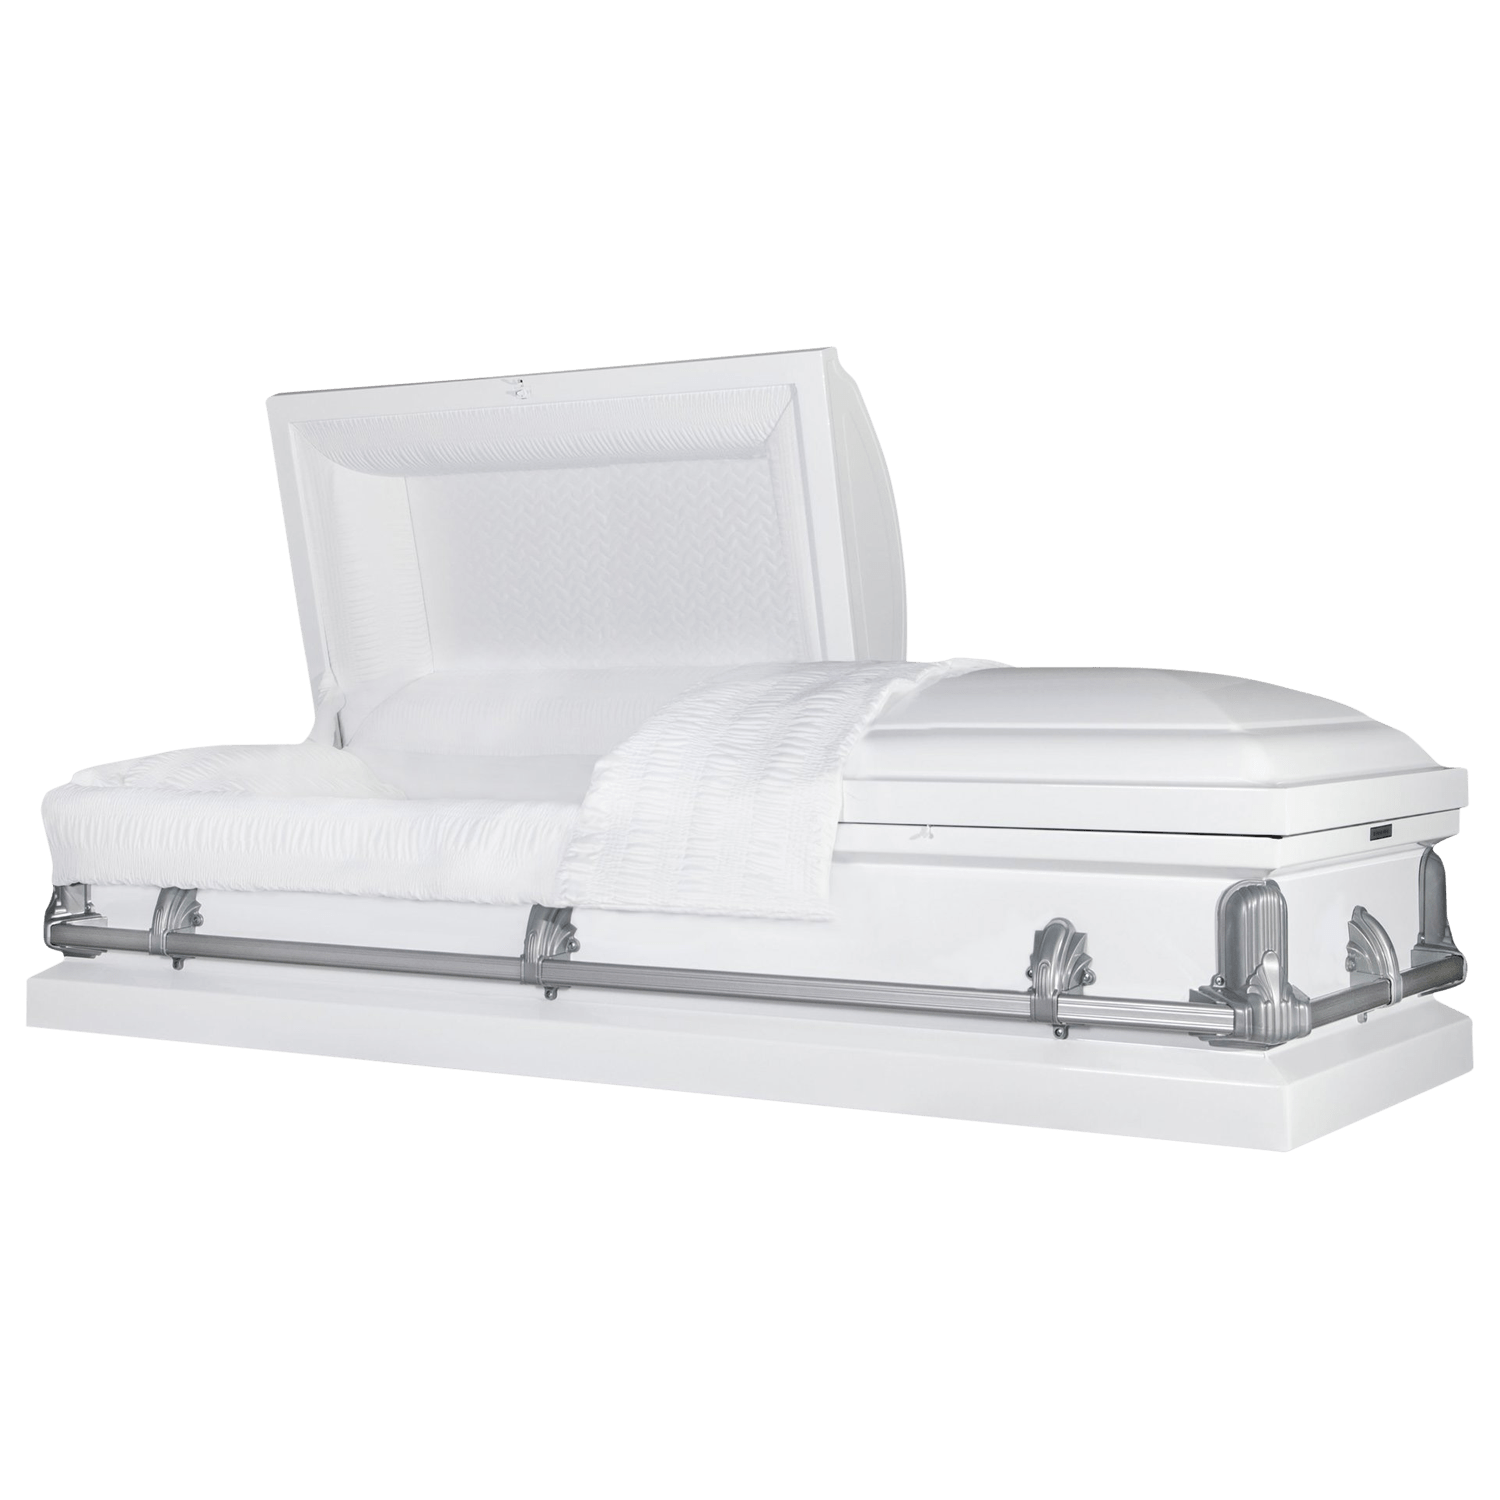 Andover Series | White Steel Casket with White Interior and Gray Hardware - Titan Casket